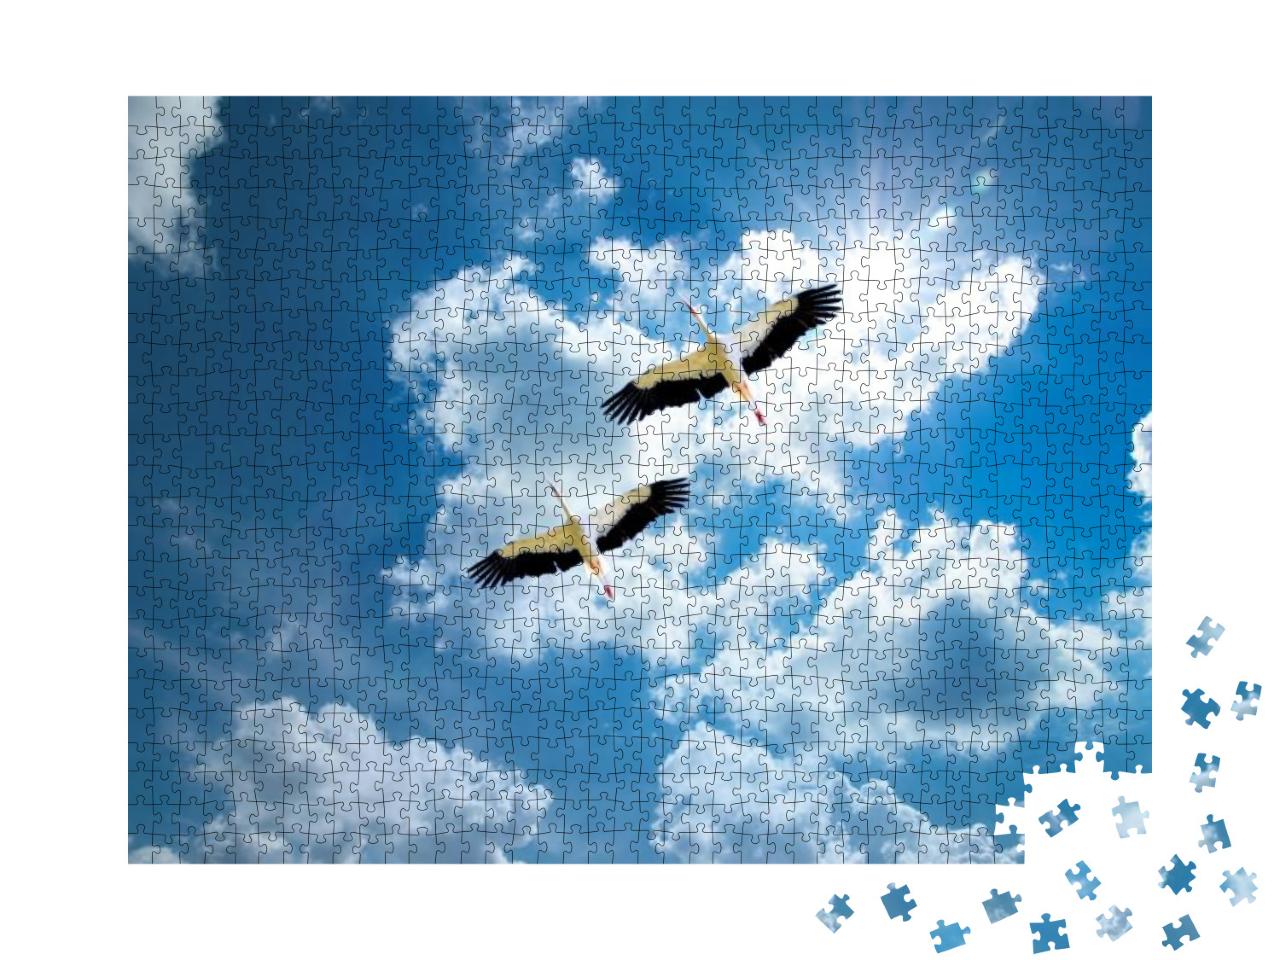 Home for Migrating Storks in Sunny Sky... Jigsaw Puzzle with 1000 pieces